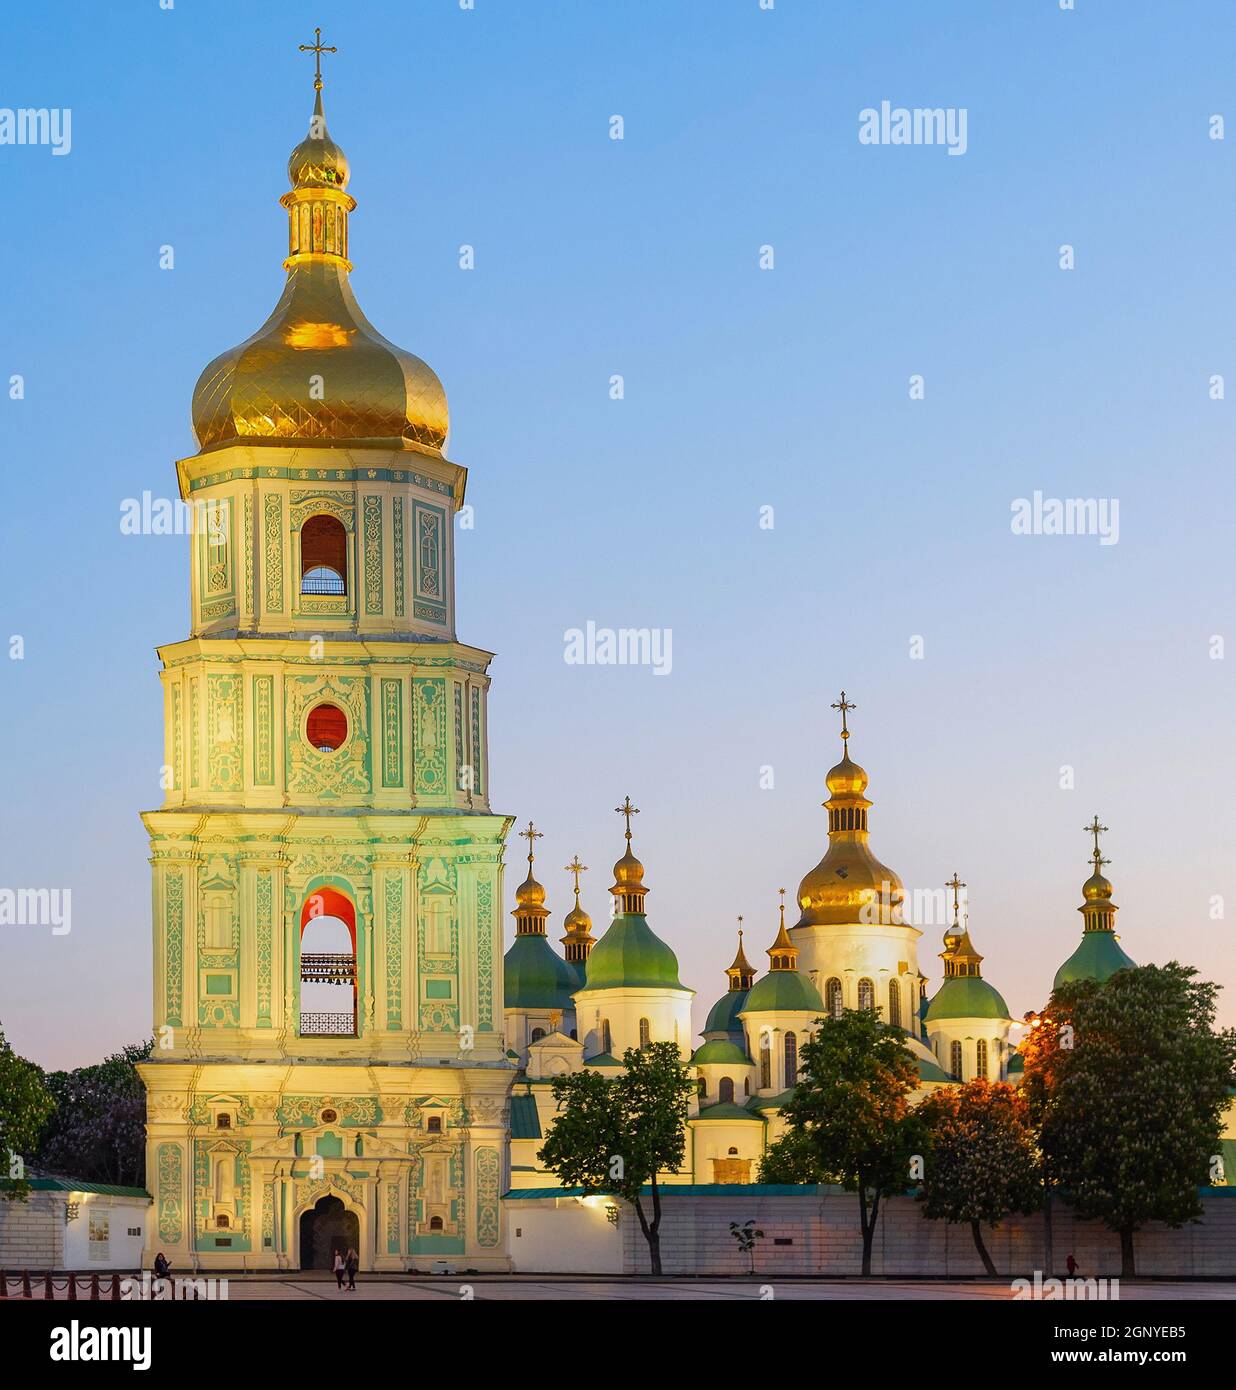 Saint Sophia's Cathedral with bell tower view at twilight, blooming chestnut trees and afterglow sky in background, Kyiv, Ukraine Stock Photo